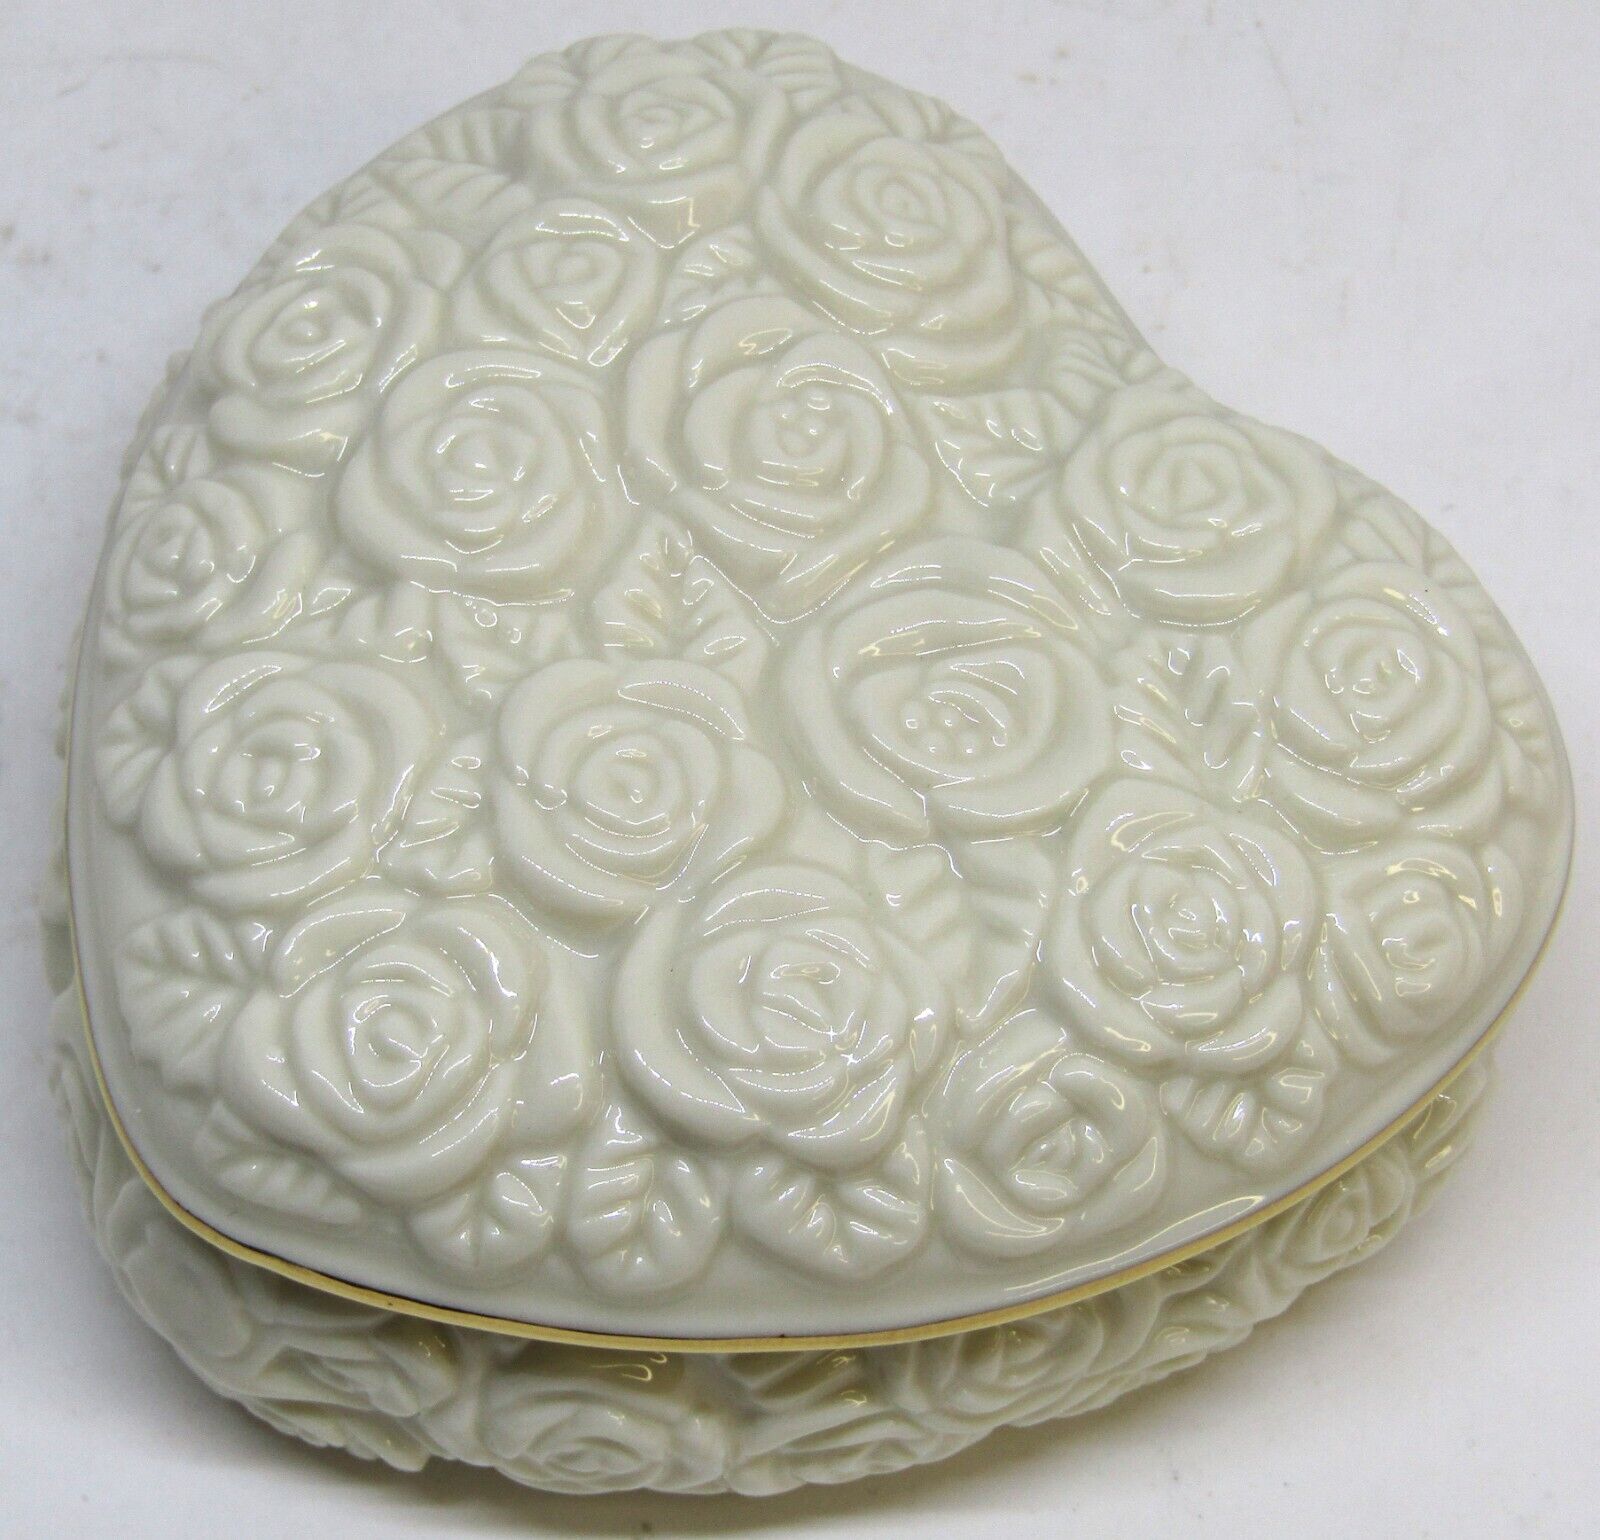 The Lenox Rose Heart Trinket Box Embossed w/Roses And Gold Trim Porcelain 3 1/2 